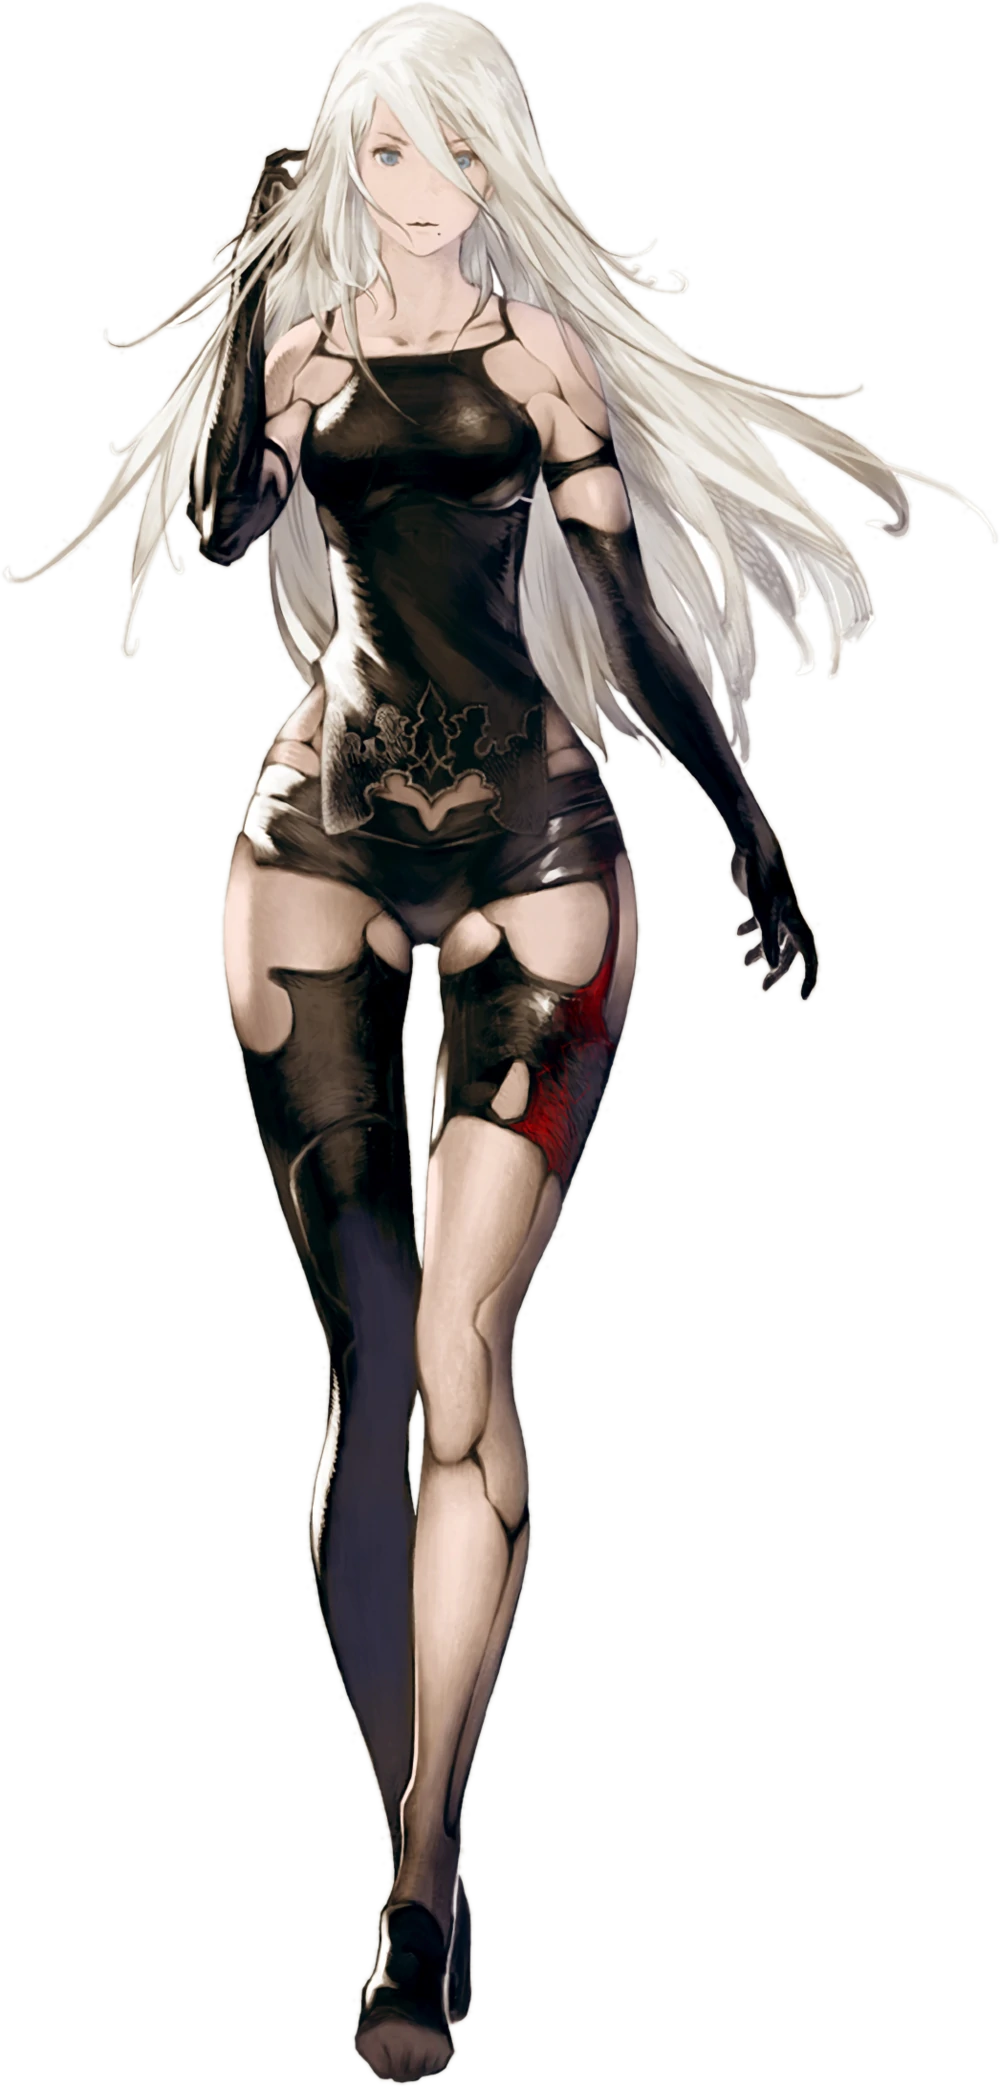 A2 from NieR Automata. An android with a doll-like body shape, A2 has long white hair. She is slightly damaged at the torso, showing traces of plasticy material under the skin.